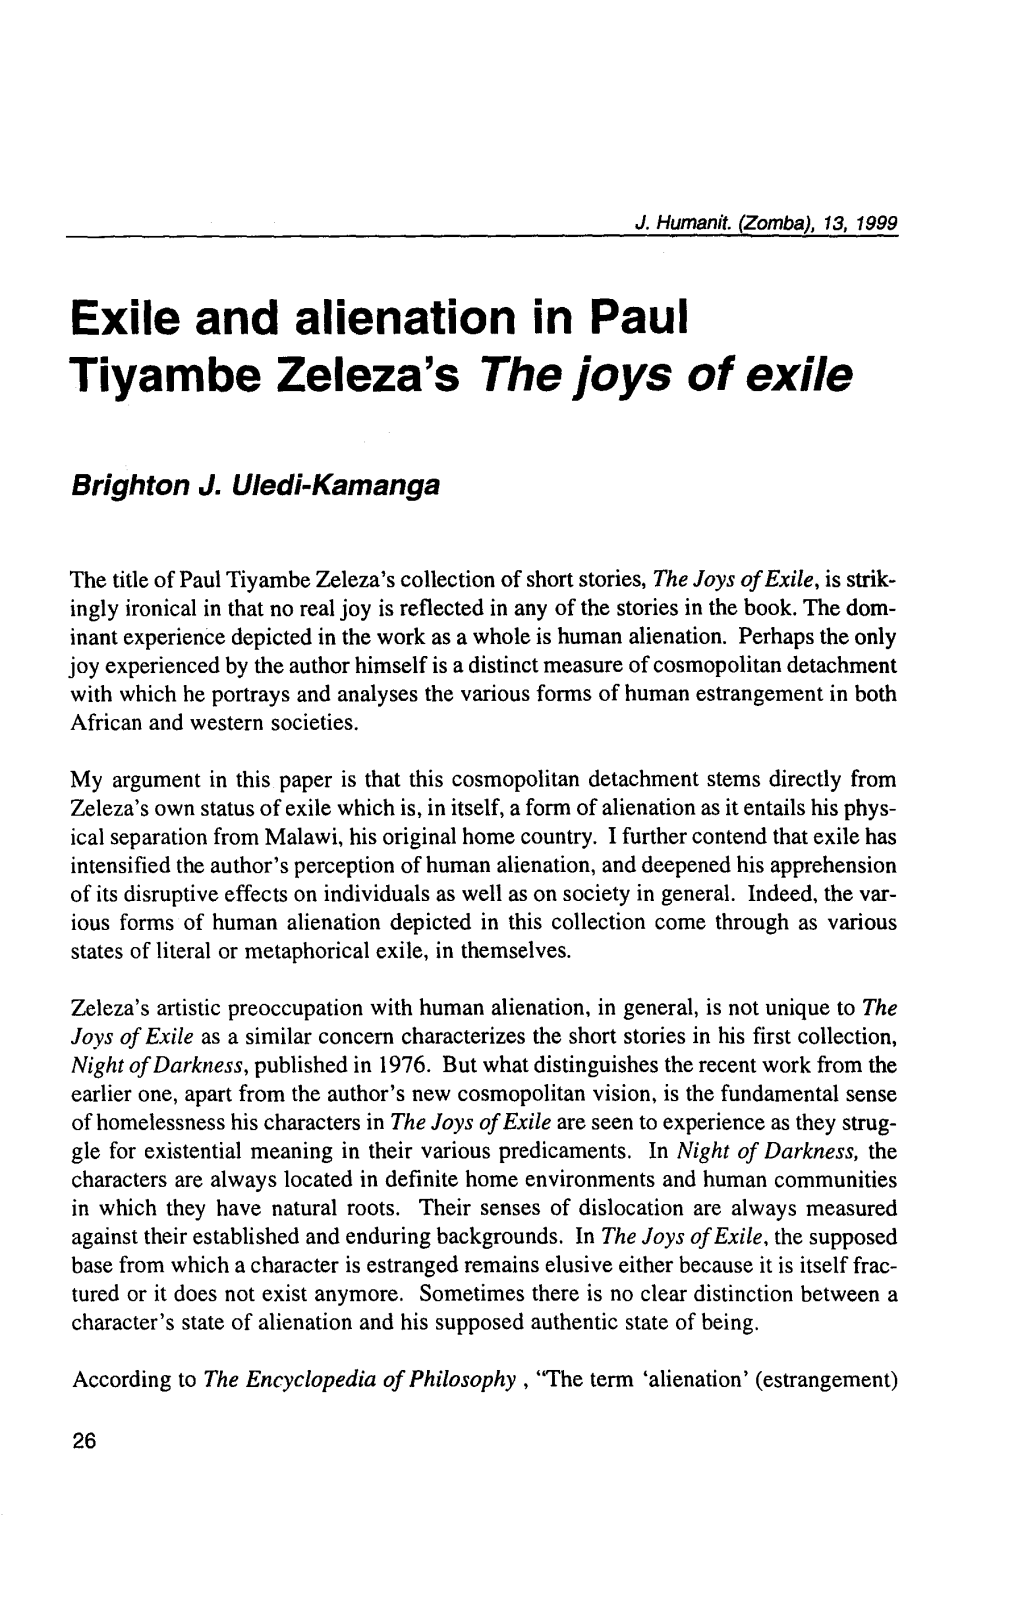 Exile and Alienation in Paul Tiyambe Zeleza's the Joys of Exile